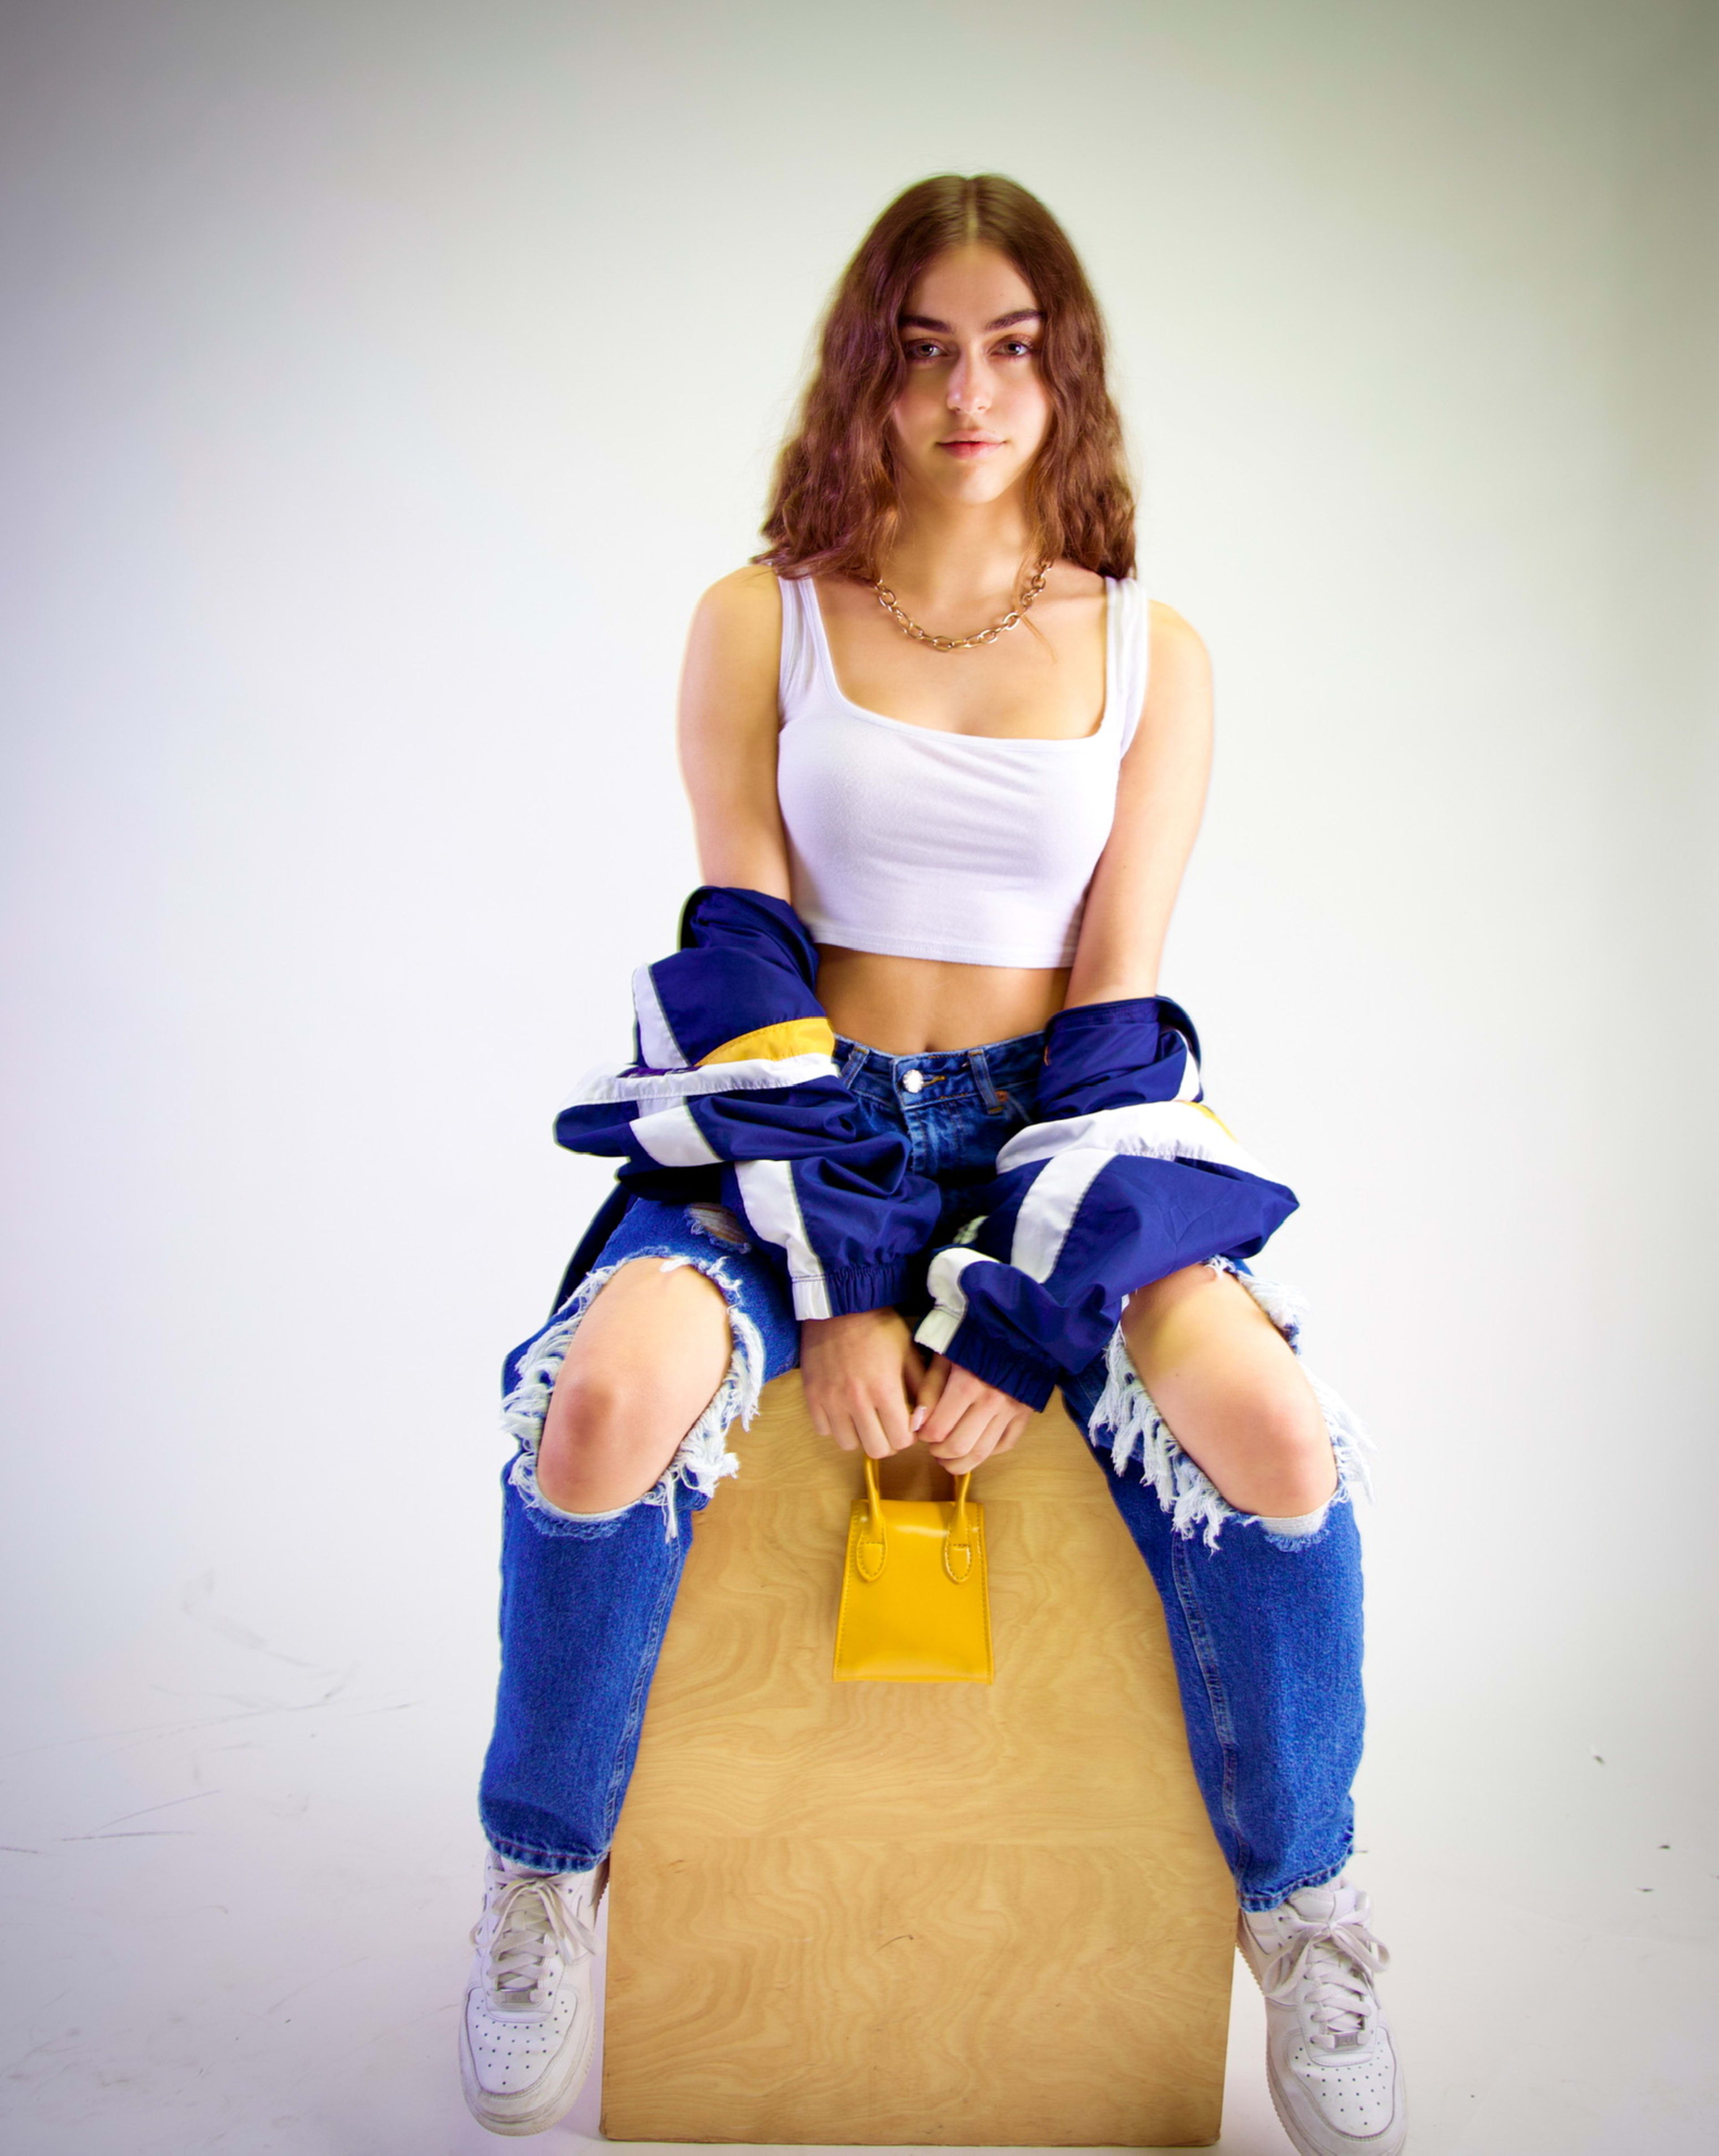 A woman with a yellow purse posing on top of a wooden box during a fashion photo shoot.